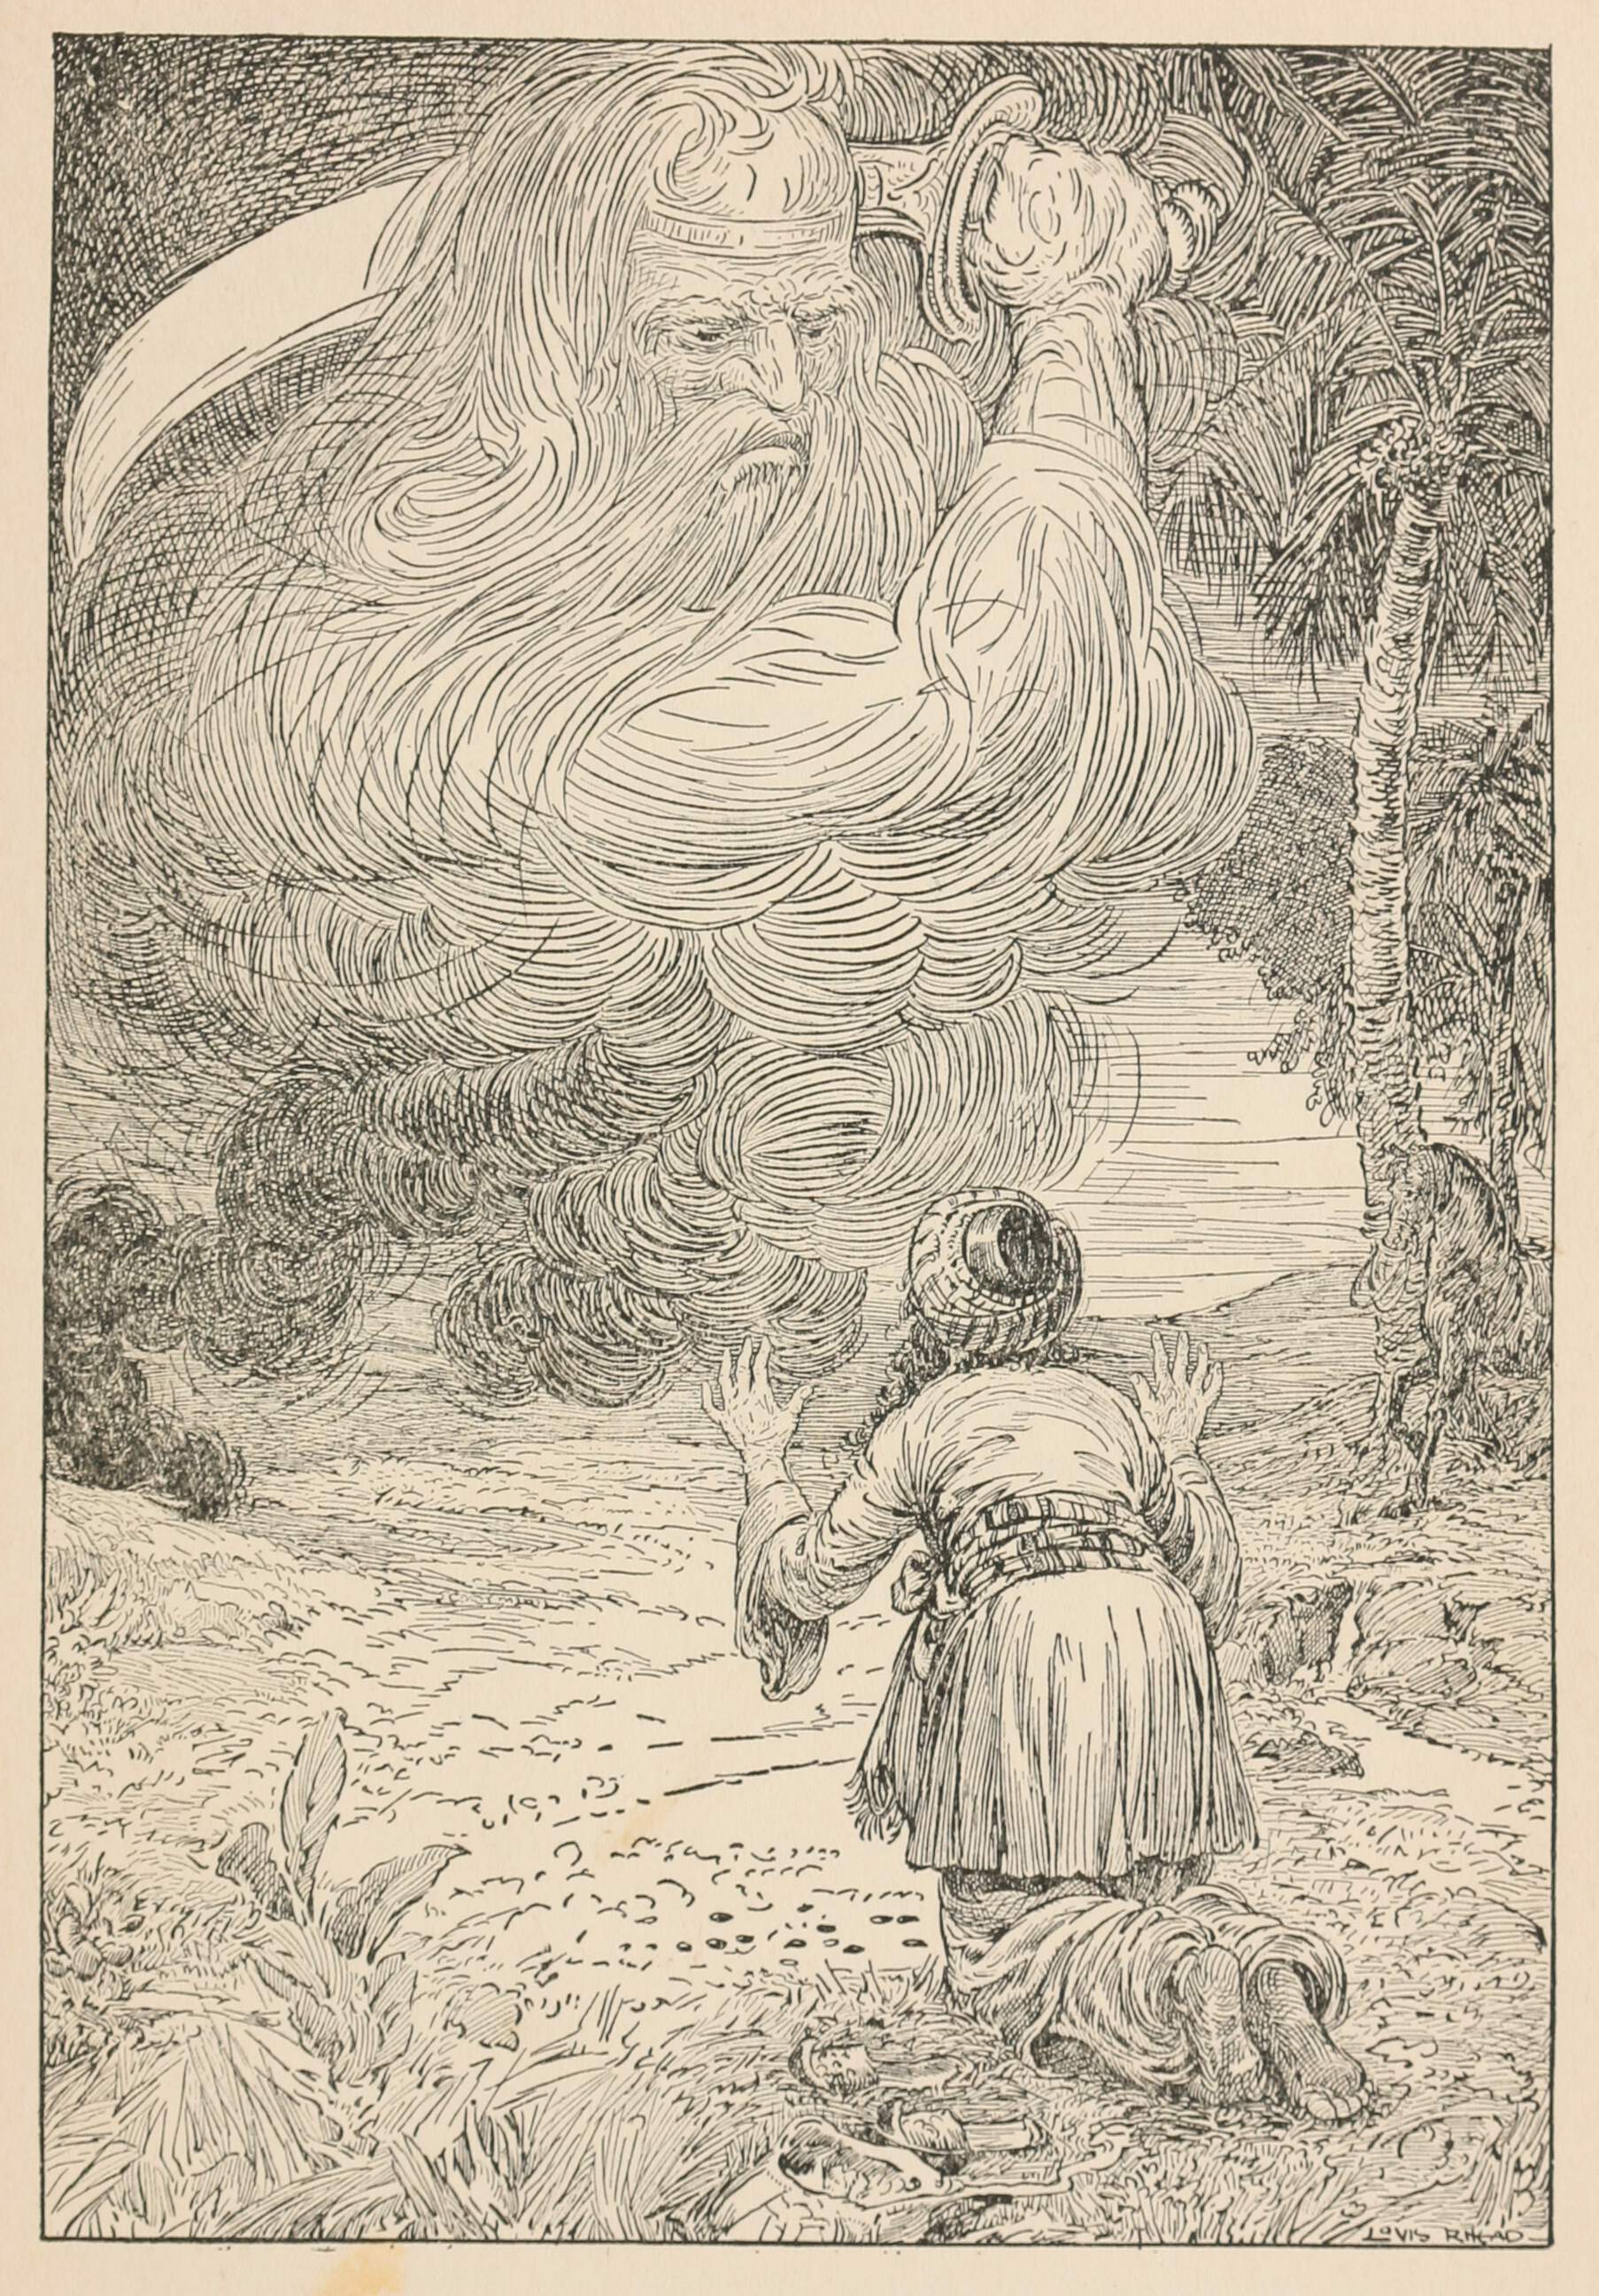 He Saw a Genie Appear | Old Book Illustrations